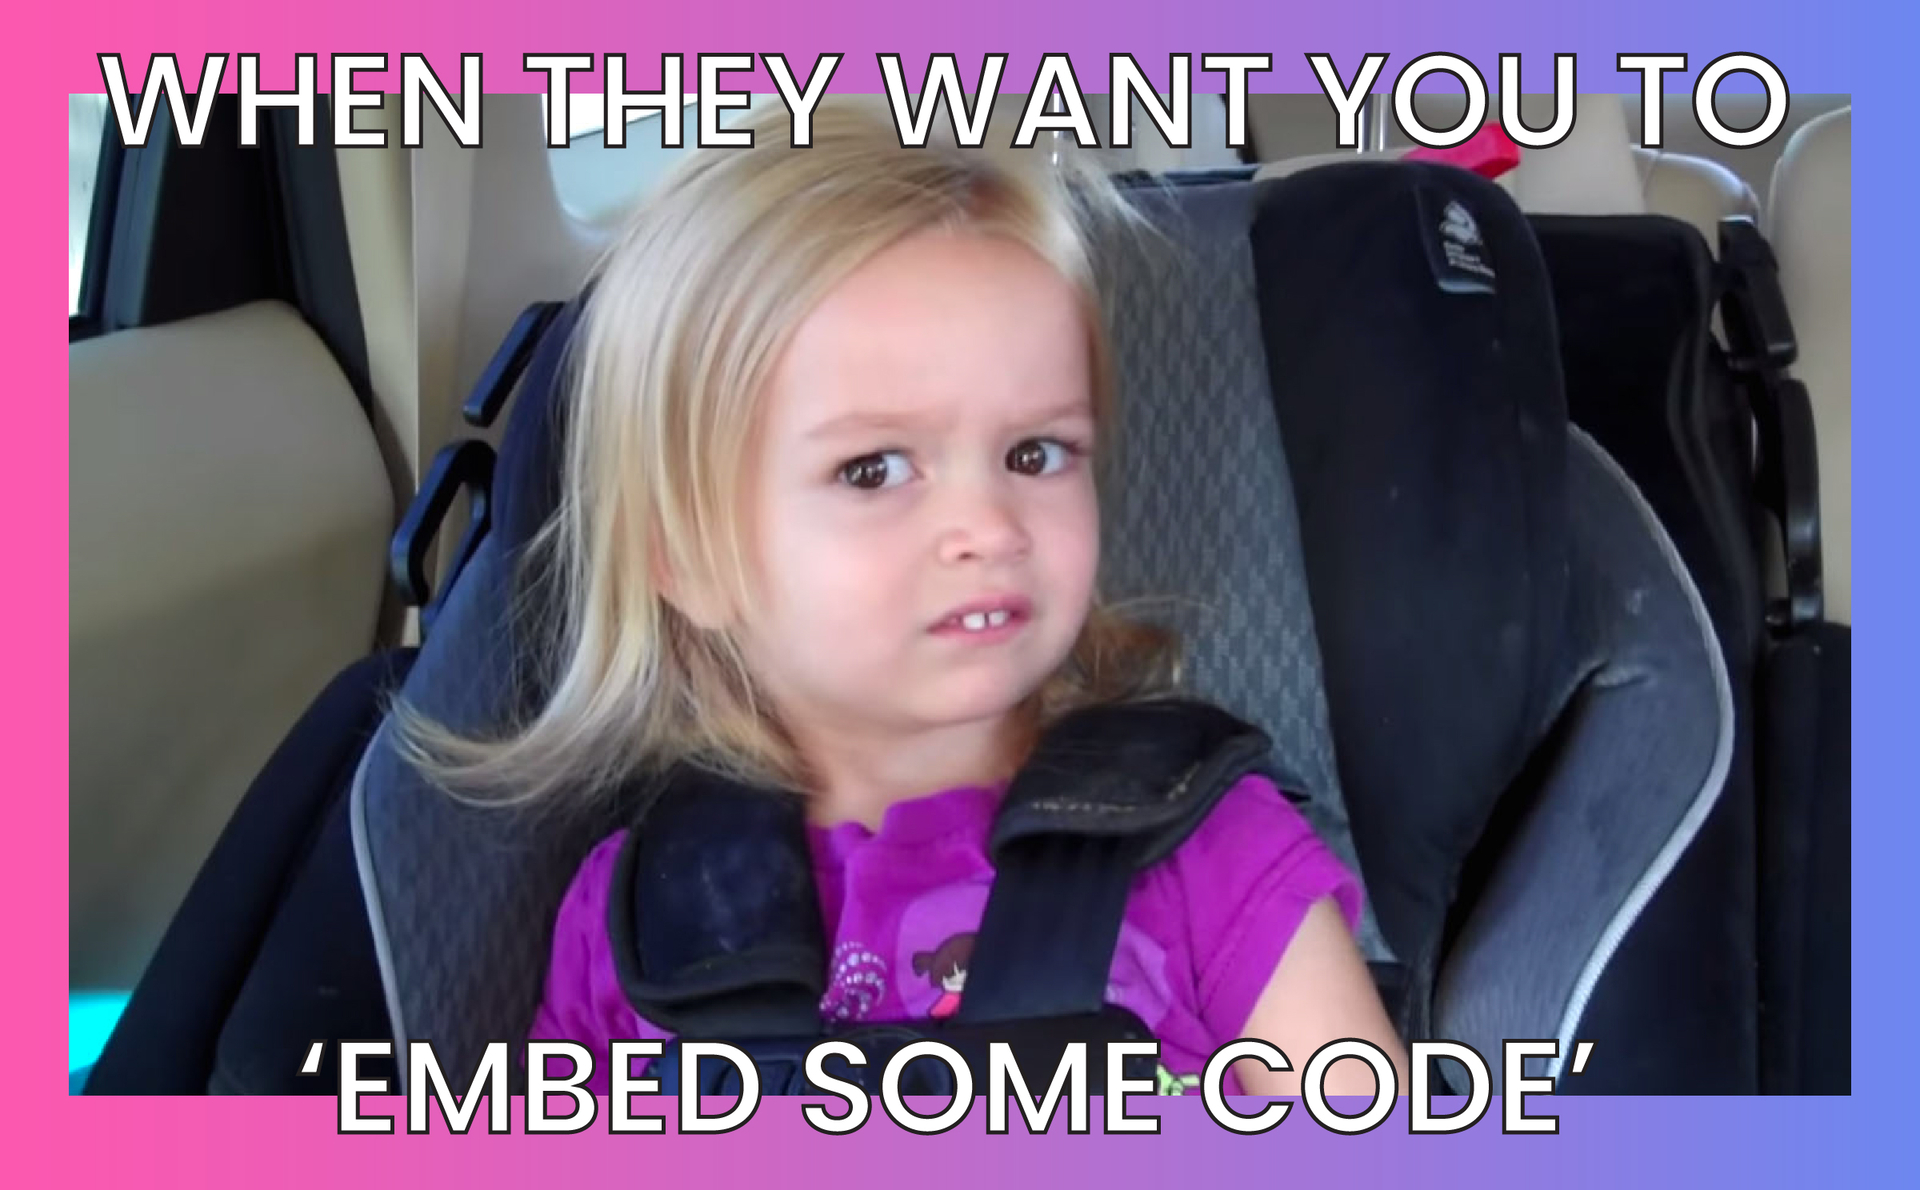 Side eye little girl meme, when they want you to 'embed some code'.